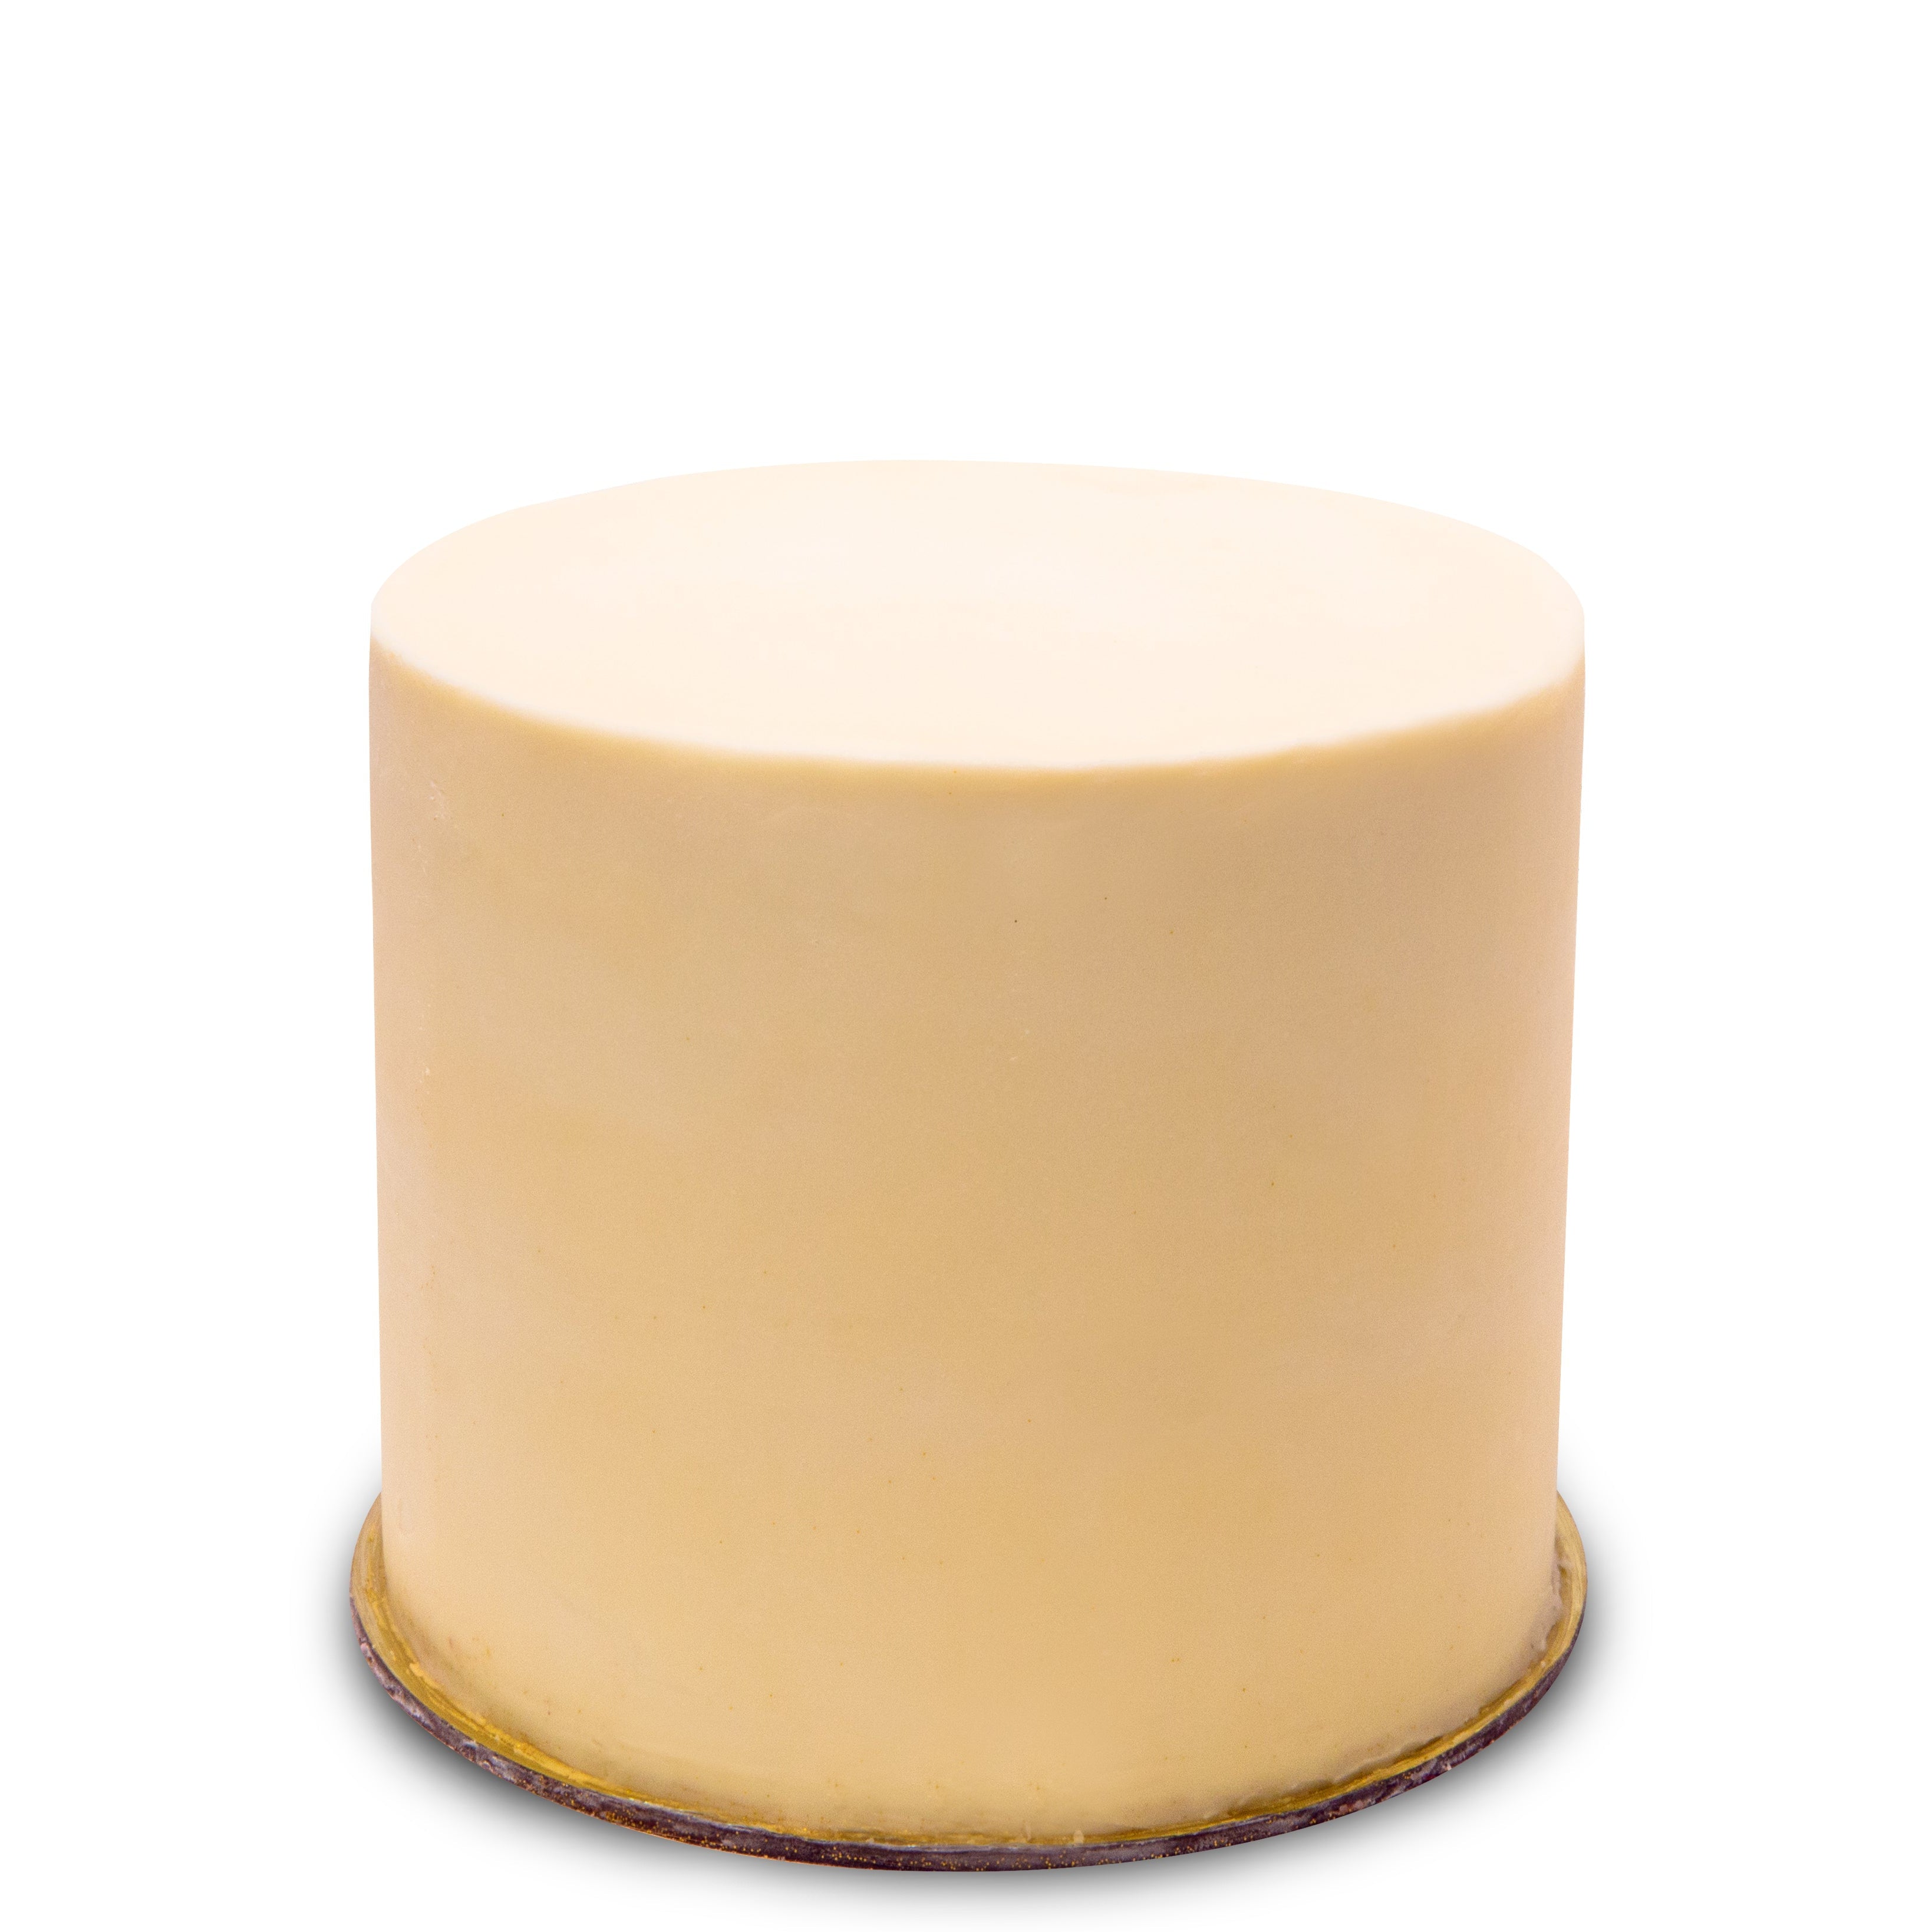 Smooth Butter Cream